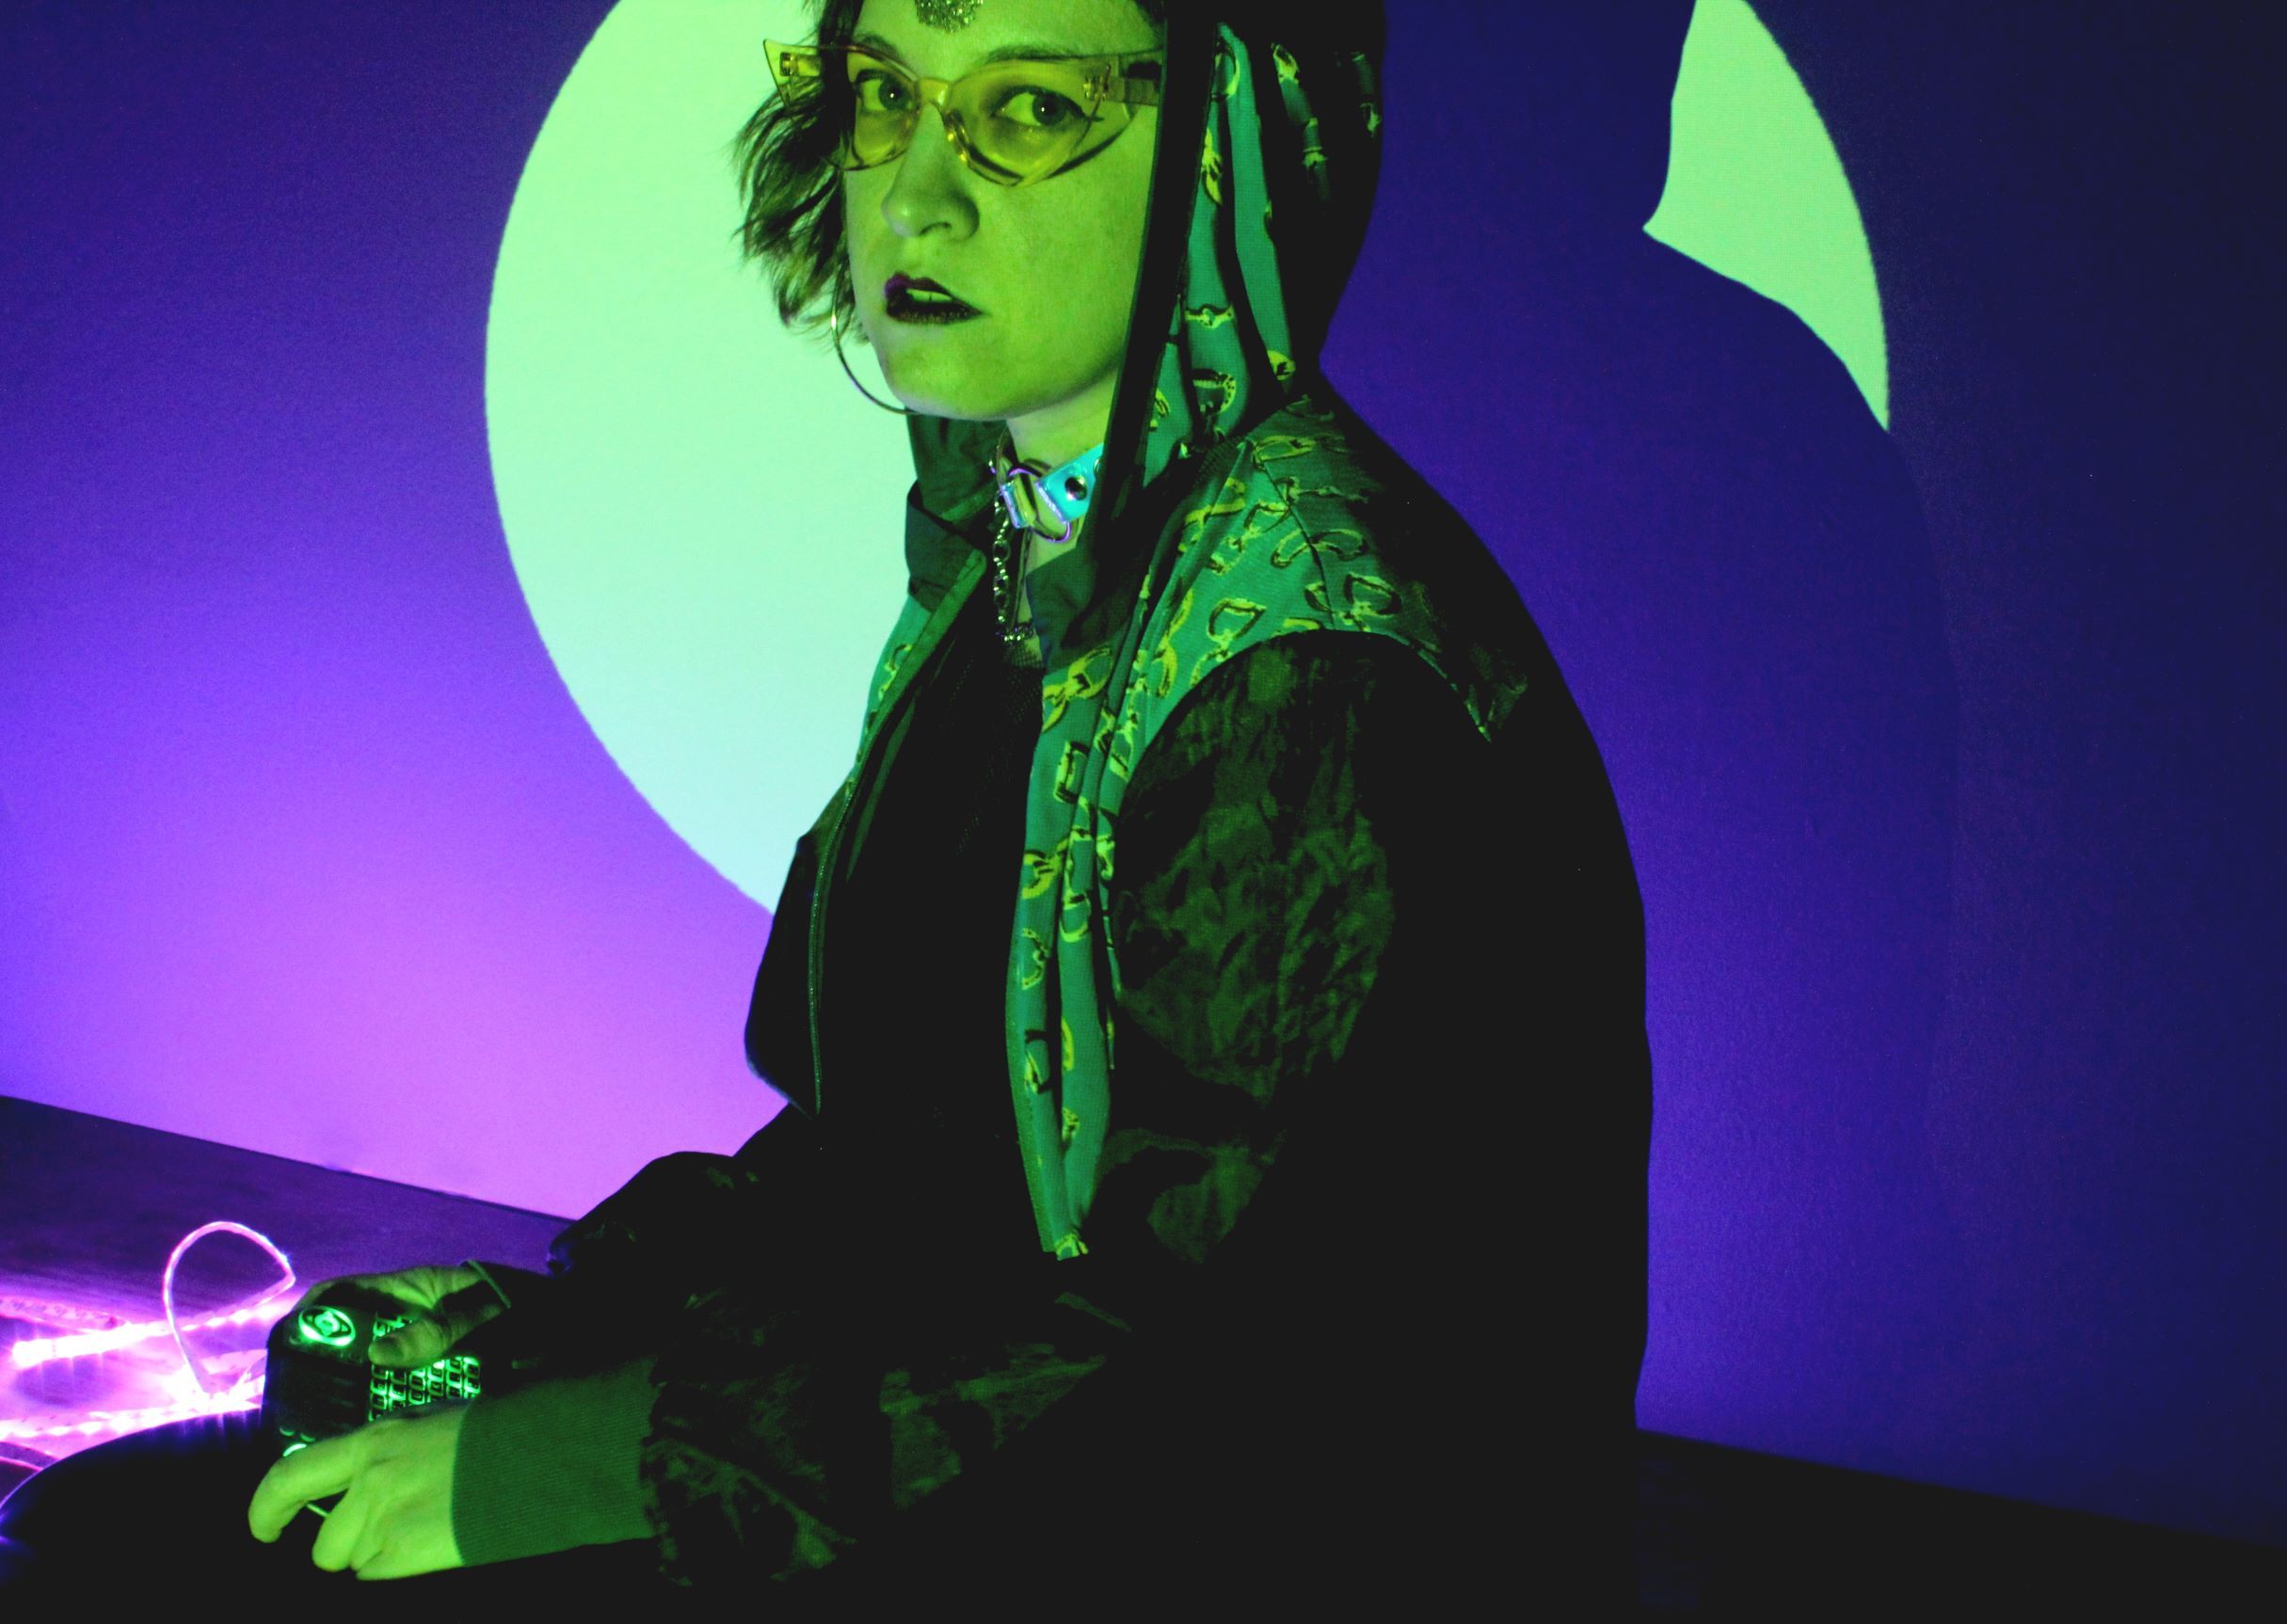 The upper body of a person wearing glasses with shoulder long hair. They are seated in green light and wear a hoodie. The background is violett and blue.